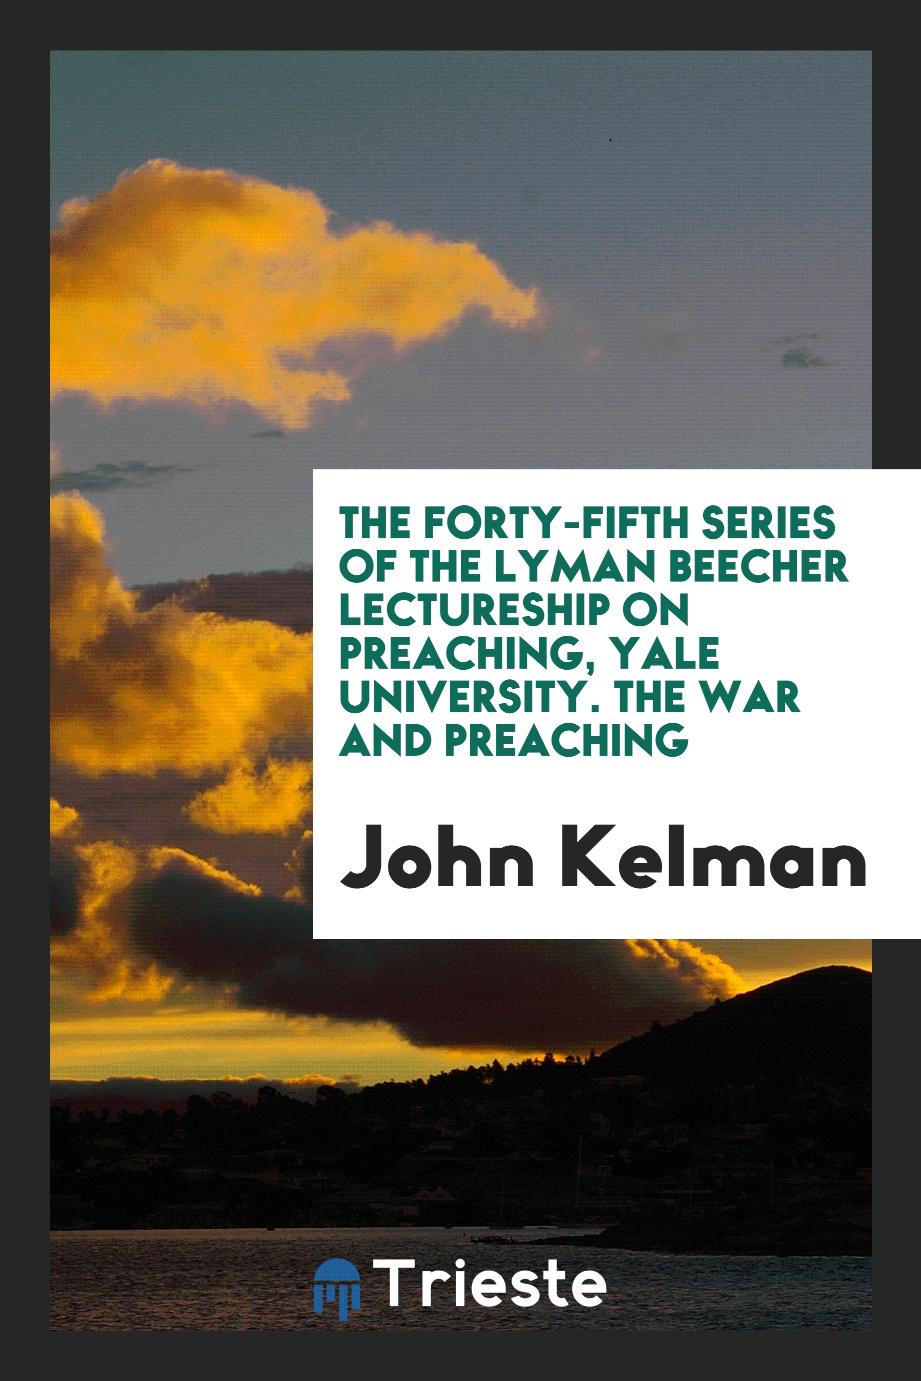 The Forty-Fifth Series of the Lyman Beecher Lectureship on Preaching, Yale University. The War and Preaching